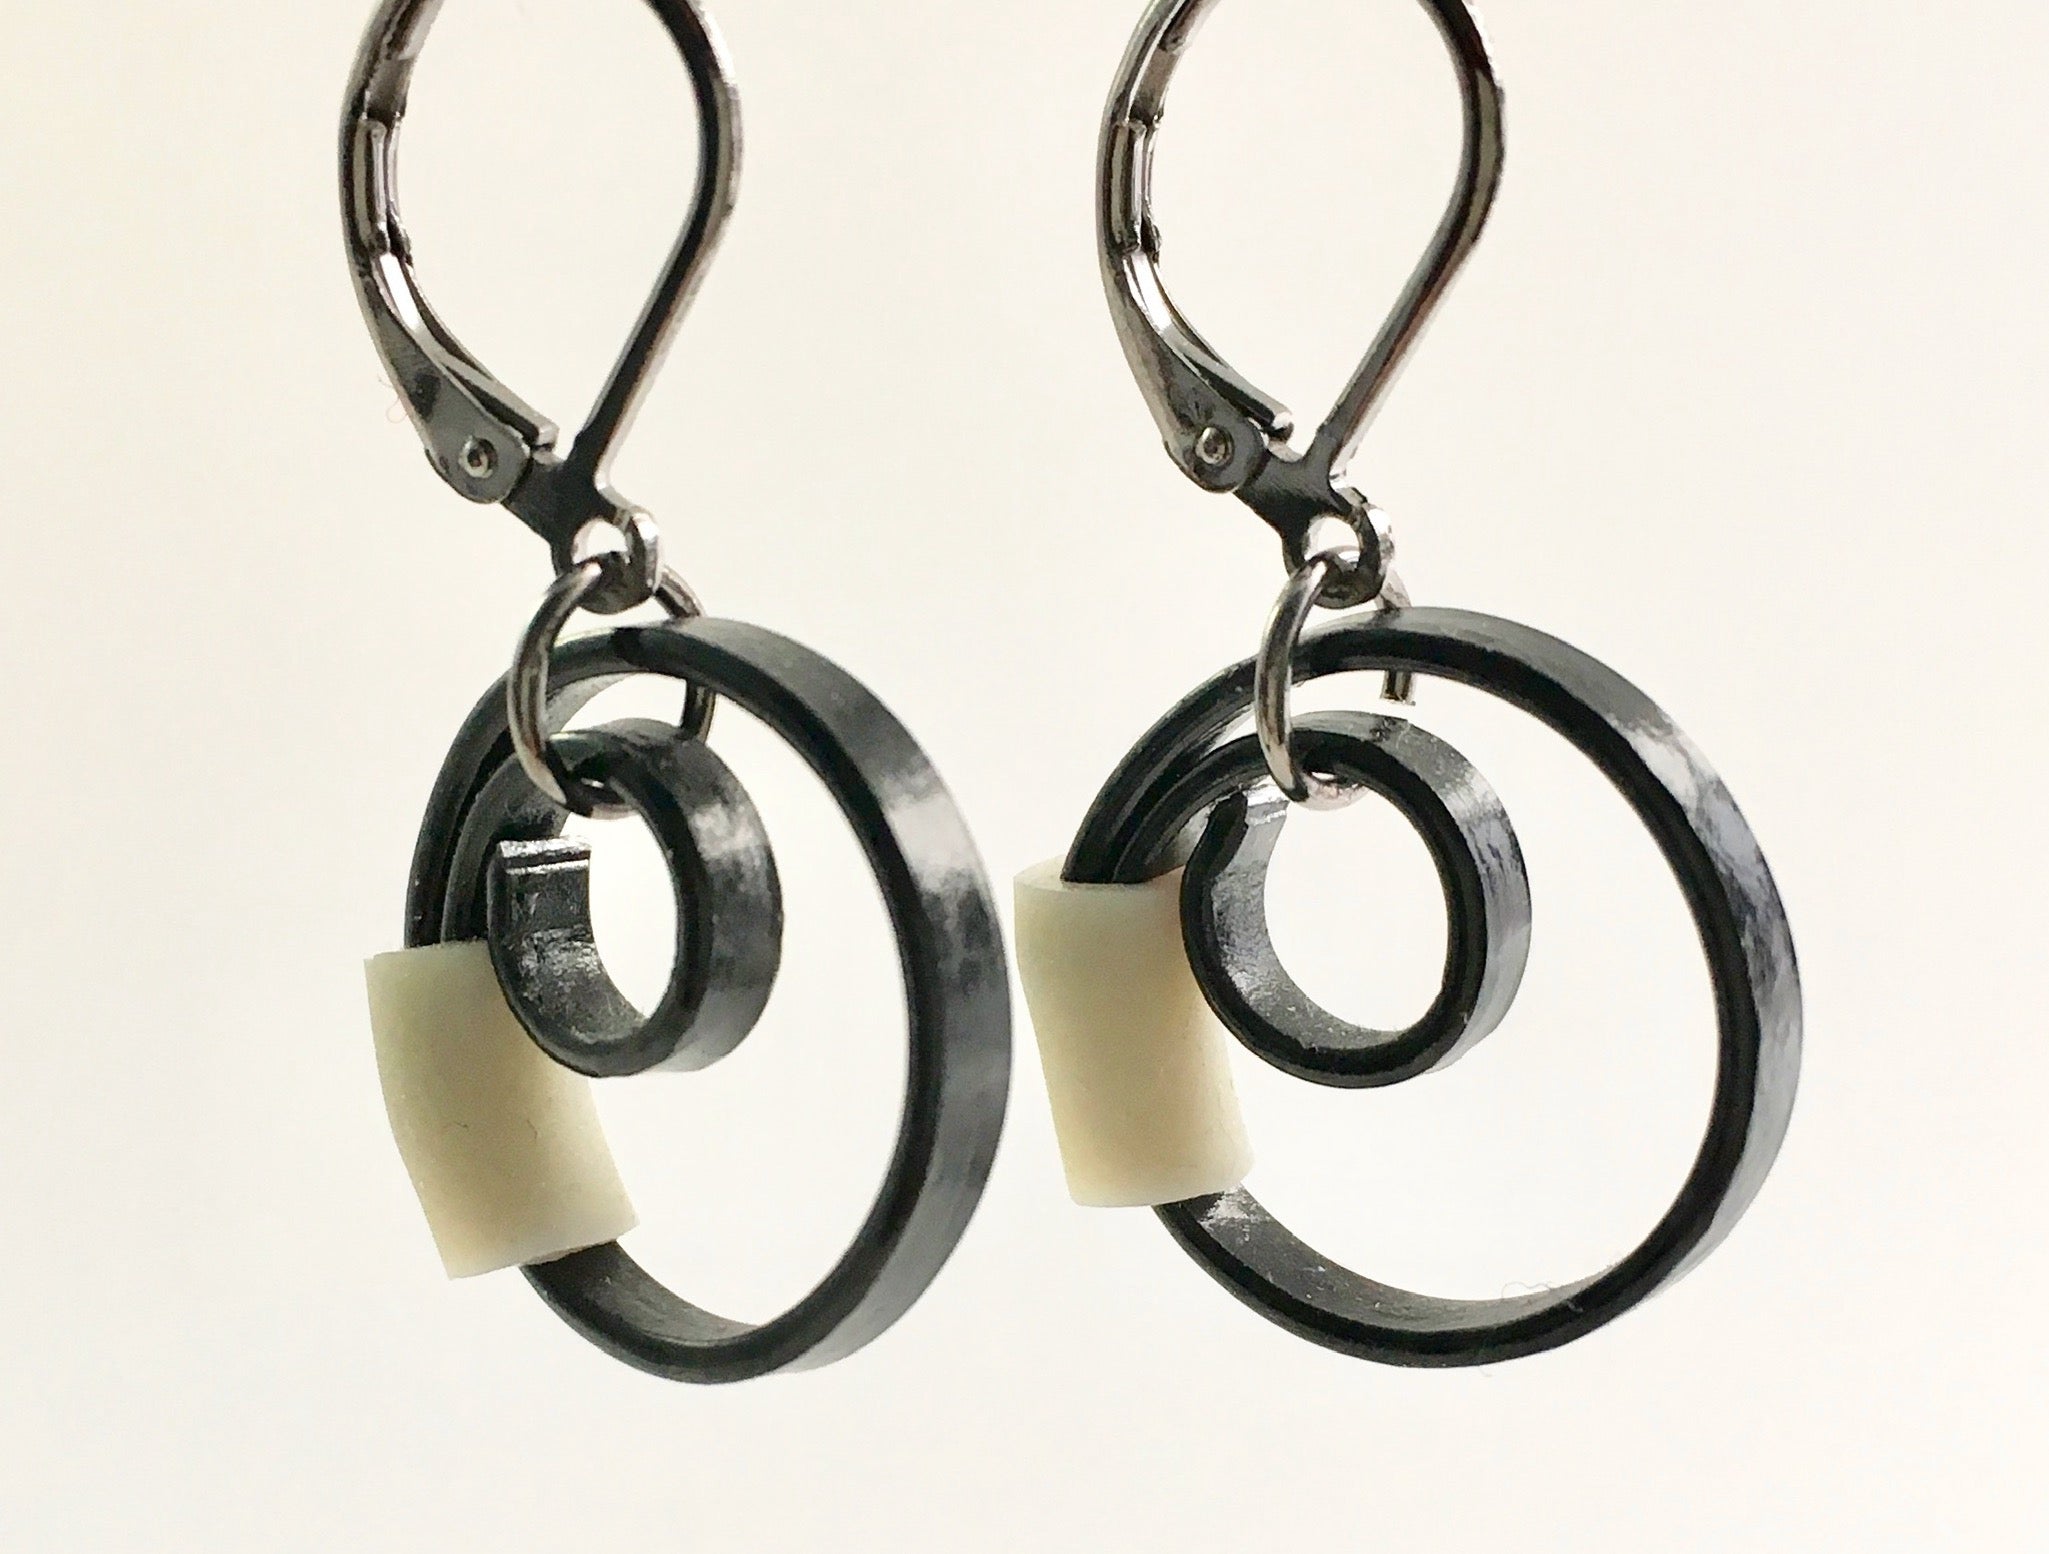 These Reel earrings with a beige accent are a simple fairly small earring that hangs 2cm long.